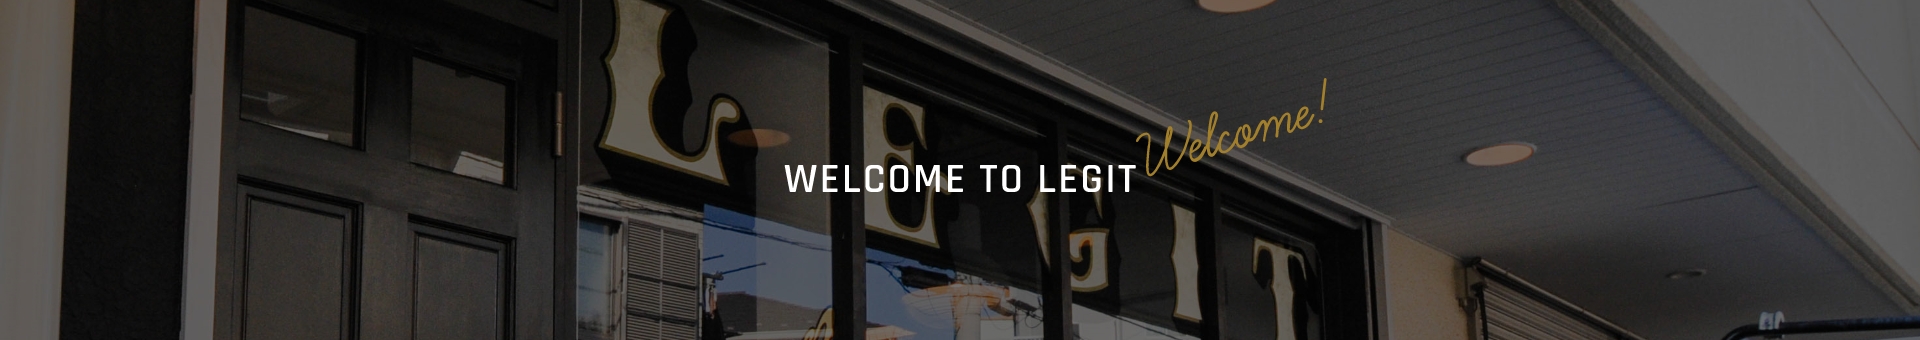 WELCOME TO LEGIT